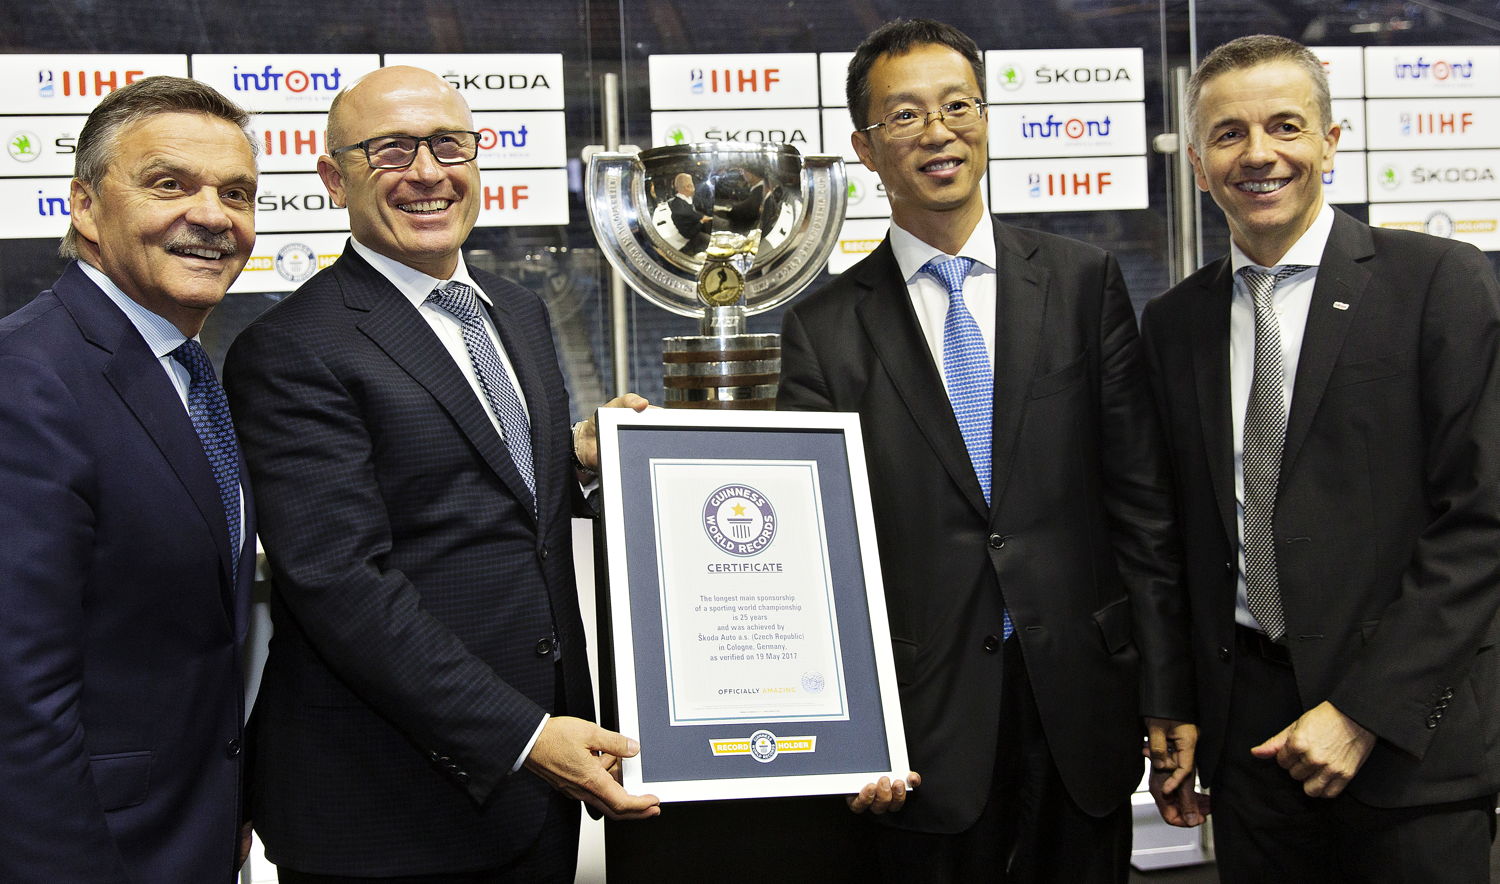 The contract to extend the partnership was signed by IIHF President Dr. René Fasel, ŠKODA CEO Bernhard Maier, Chairman Wanda Sports Holding Lincoln Zhang and President and CEO of Infront Sports & Media Philippe Blattner on Friday at the Lanxess Arena in Cologne. The 25-year commitment has been recognized as a GUINNESS WORLD RECORD for 'the longest main sponsorship in the history of sports world championships'.